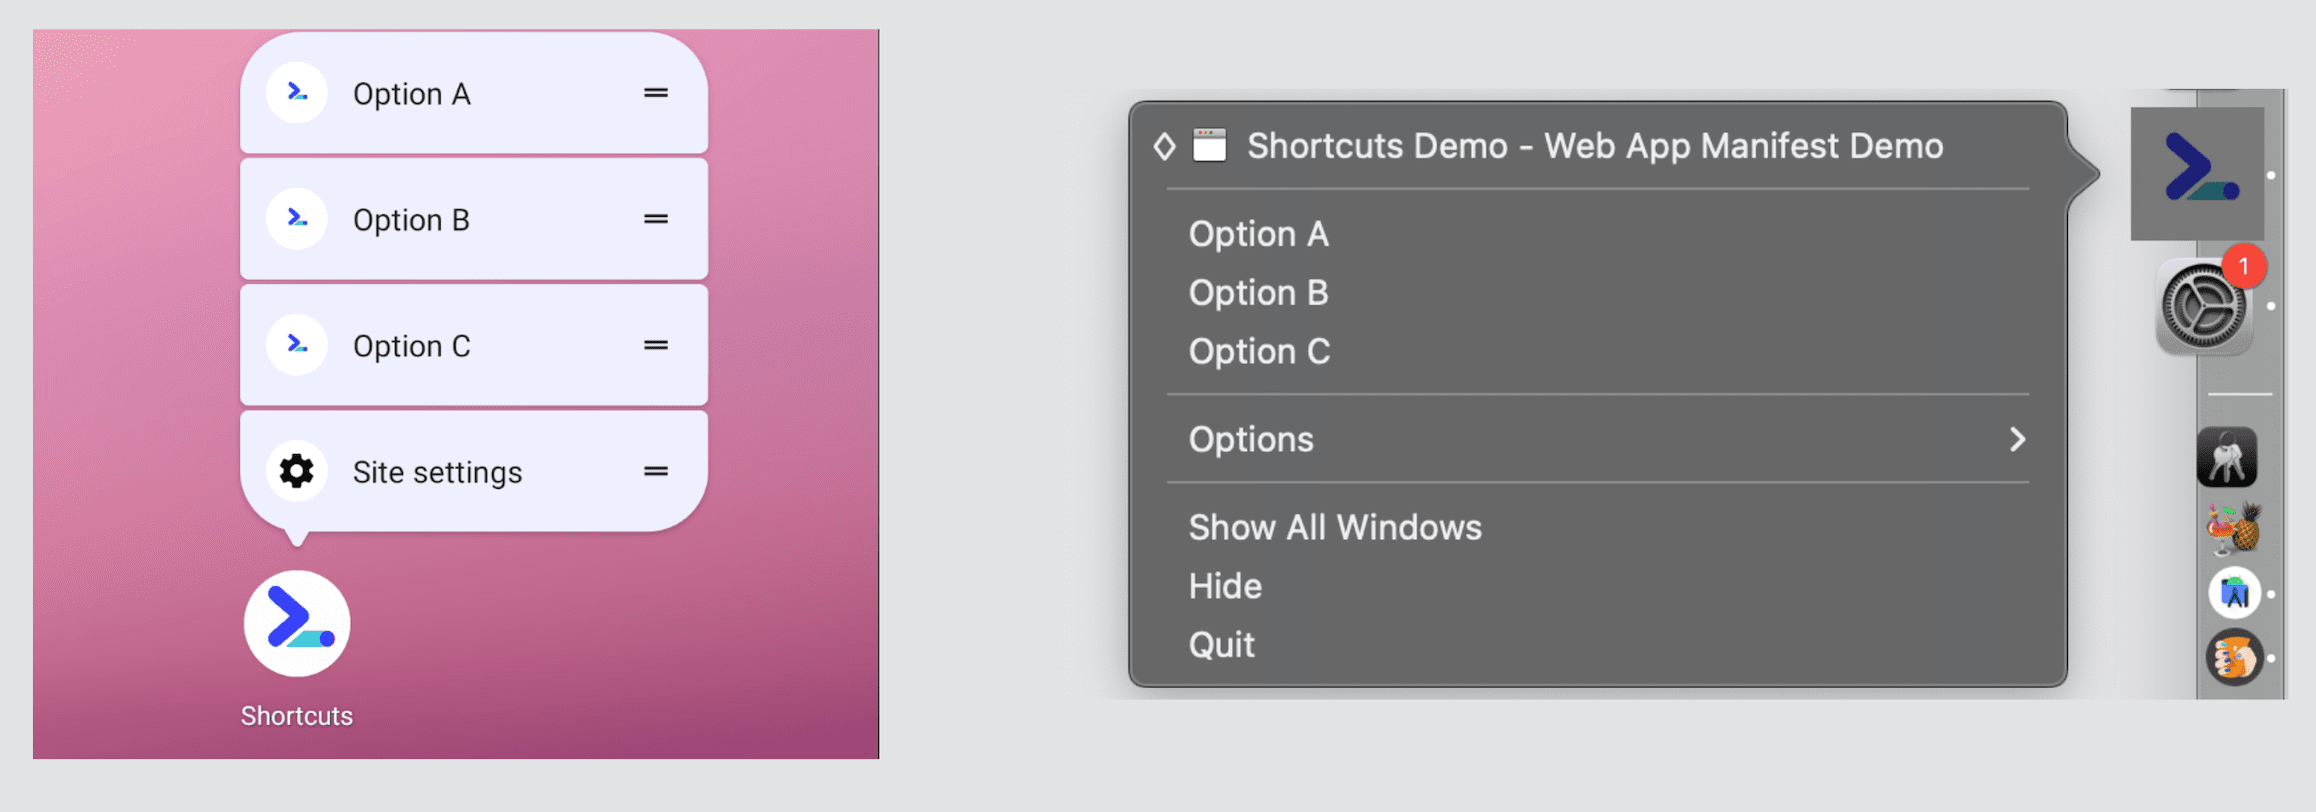 App shortcuts in Android and macOS.